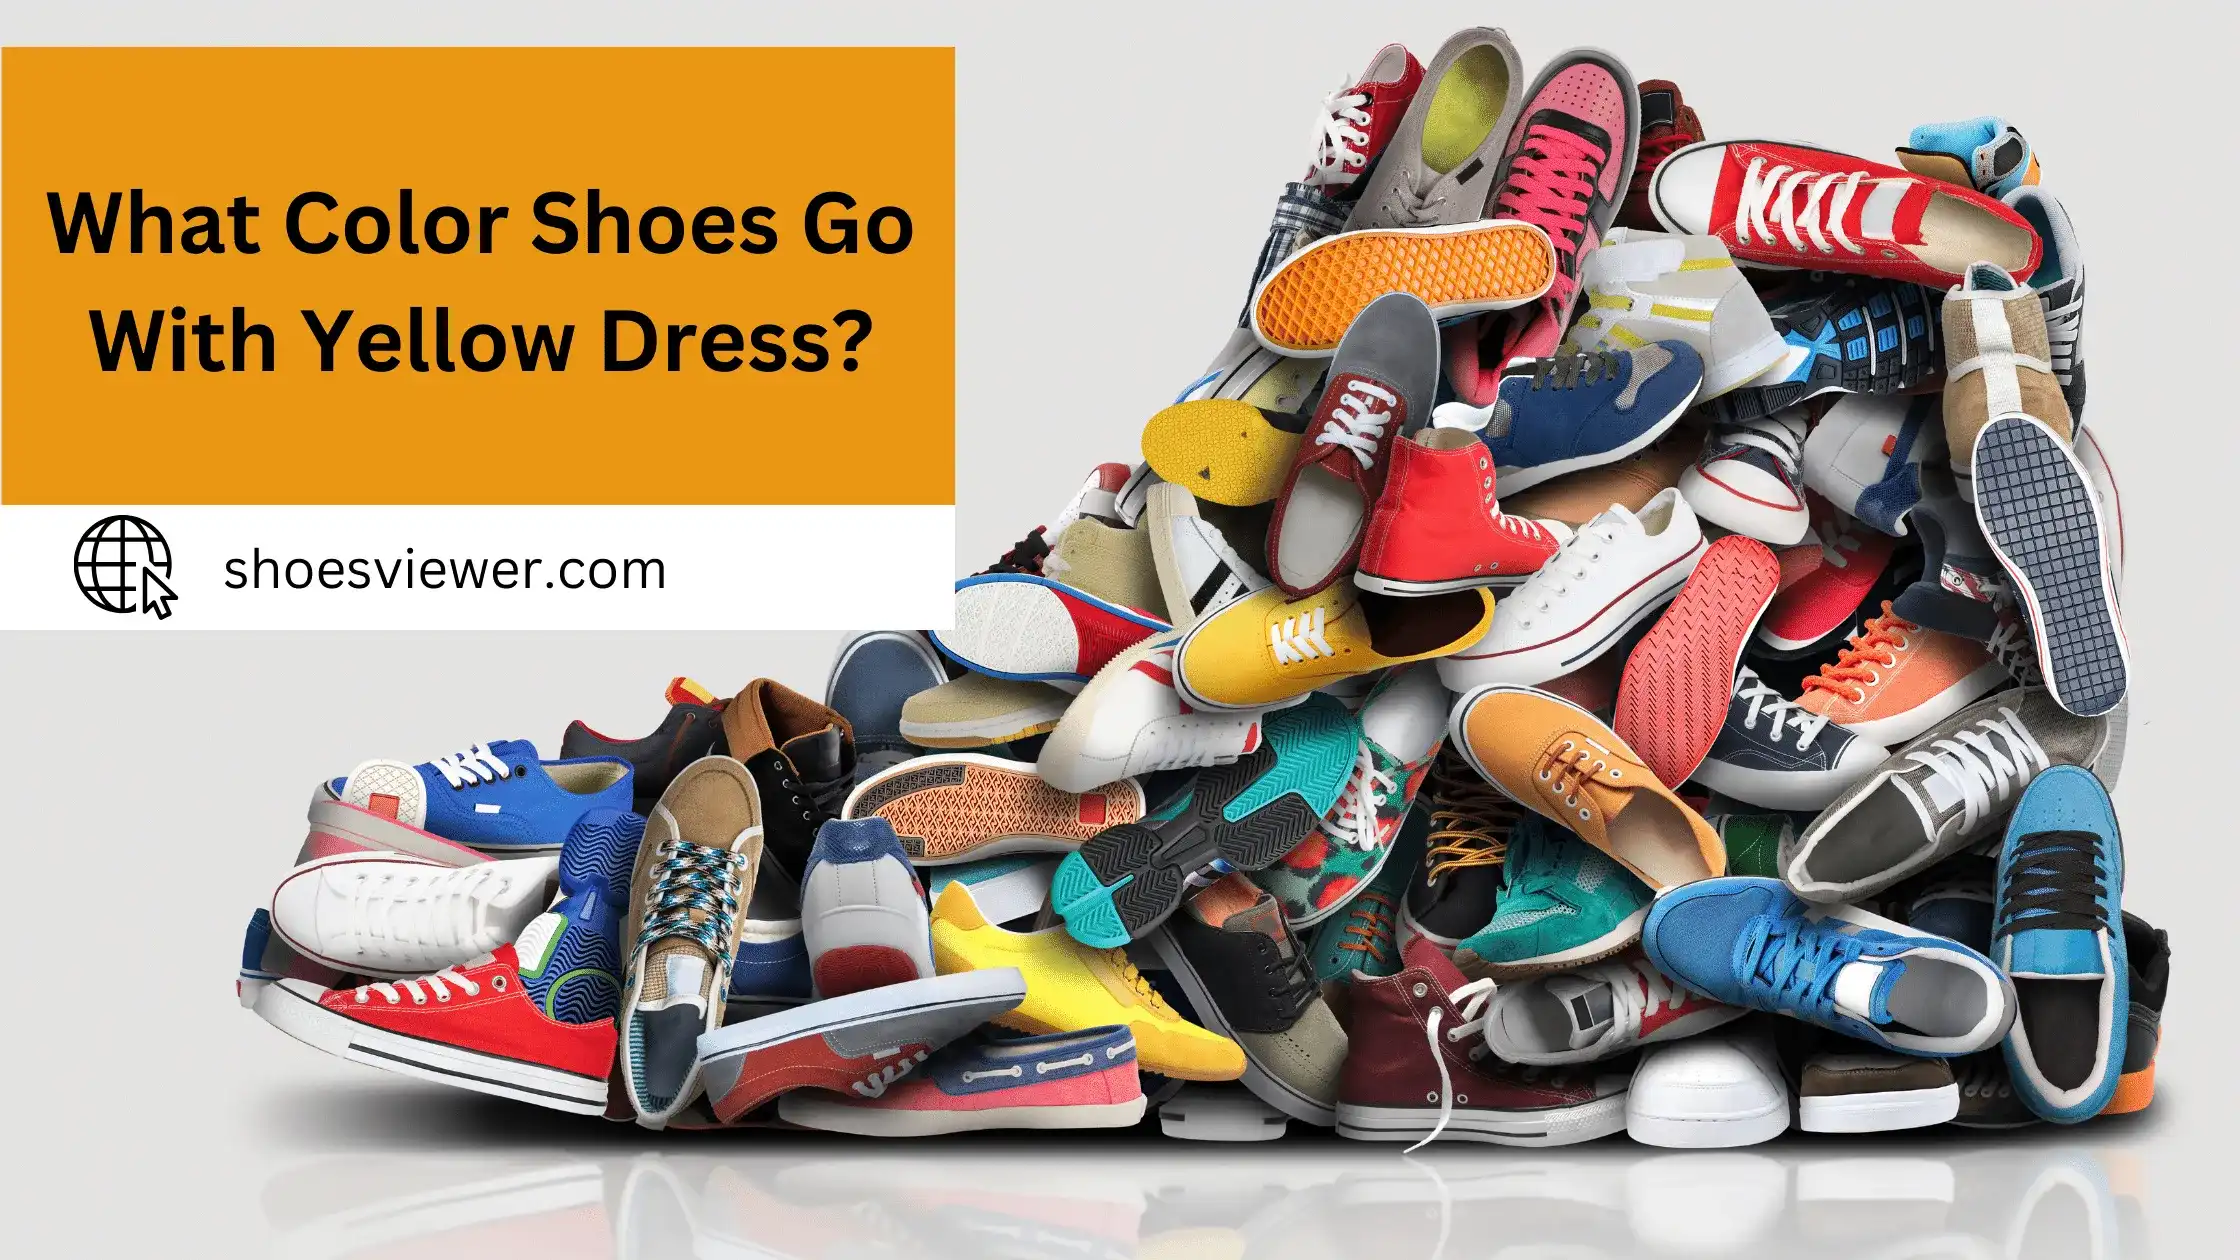 What Color Shoes Go With Yellow Dress? User Guide